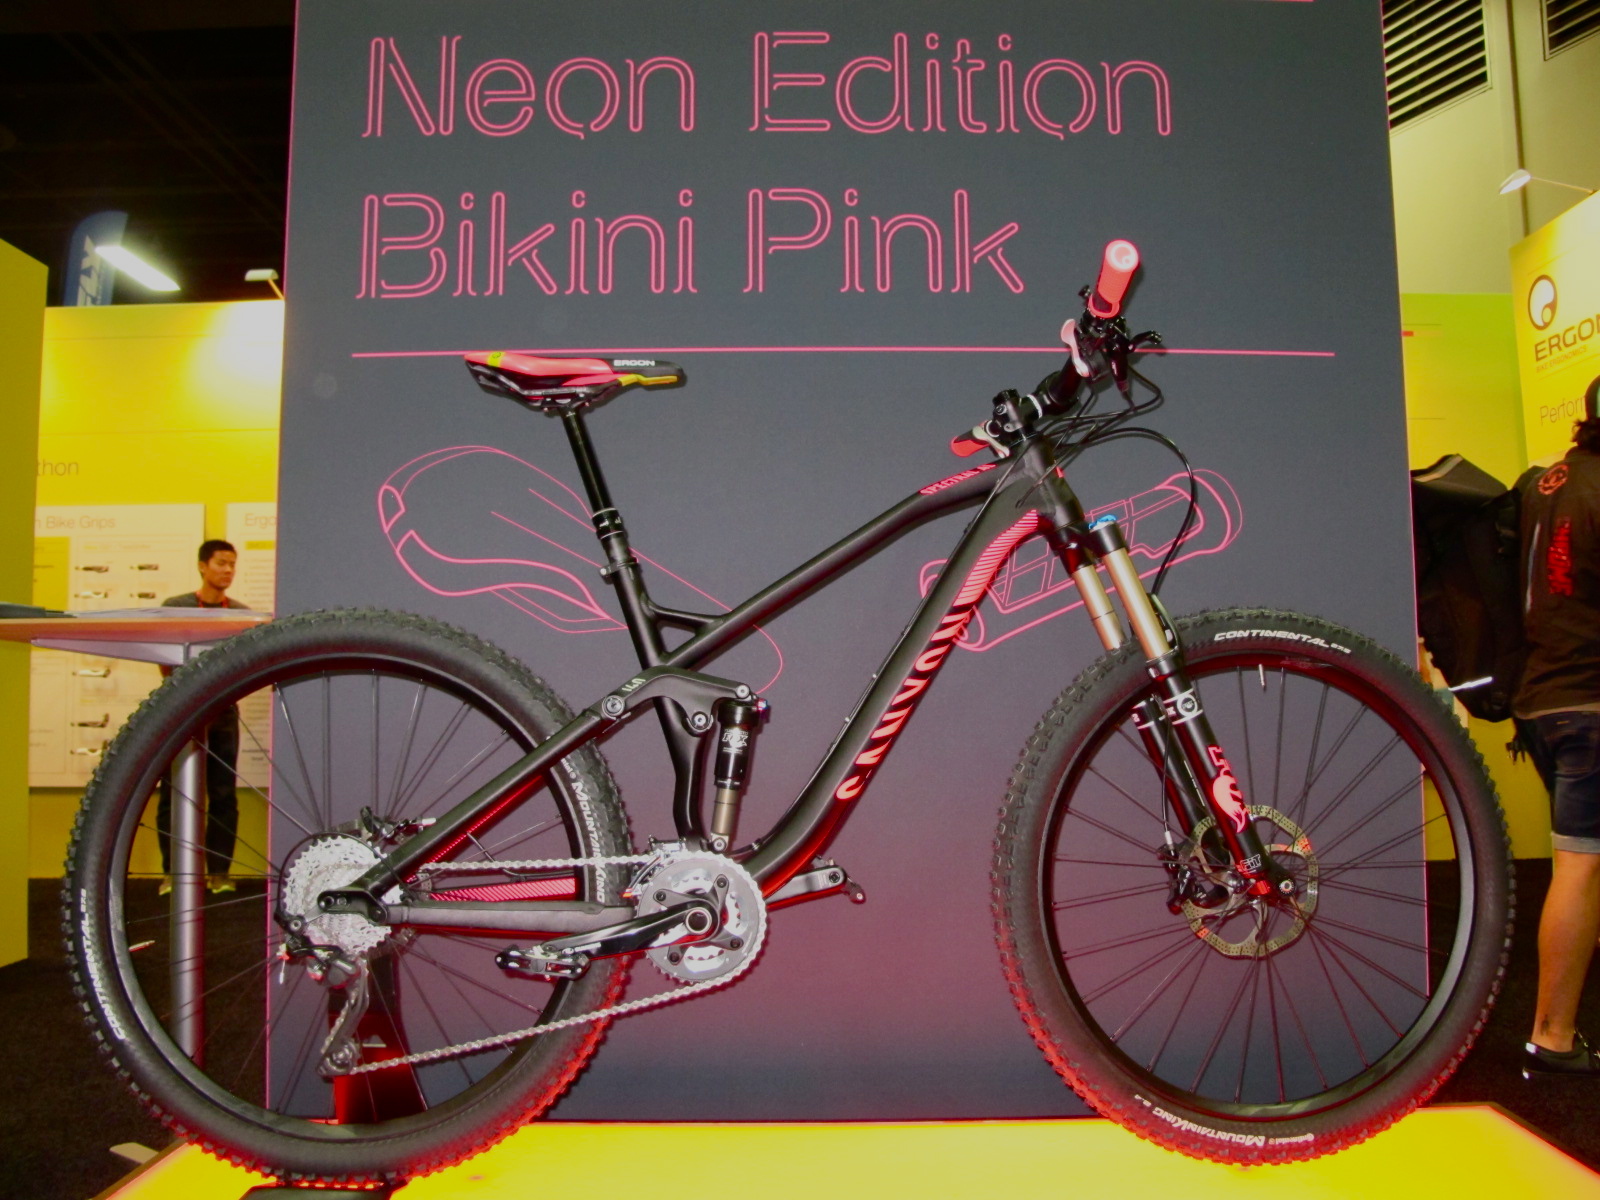 Obviously we're a fan of all things pink around here and this Canyon Spectral AL that was done up in Ergon's new Neon Edition Bikini Pink SME3 Pro saddle and GE1 grips was eye catching. The pink will be available on Ergon's SME3 Pro and SME3 Pro Carbon seats as well as GE1 and GE1 Slim grips. Check em' out.